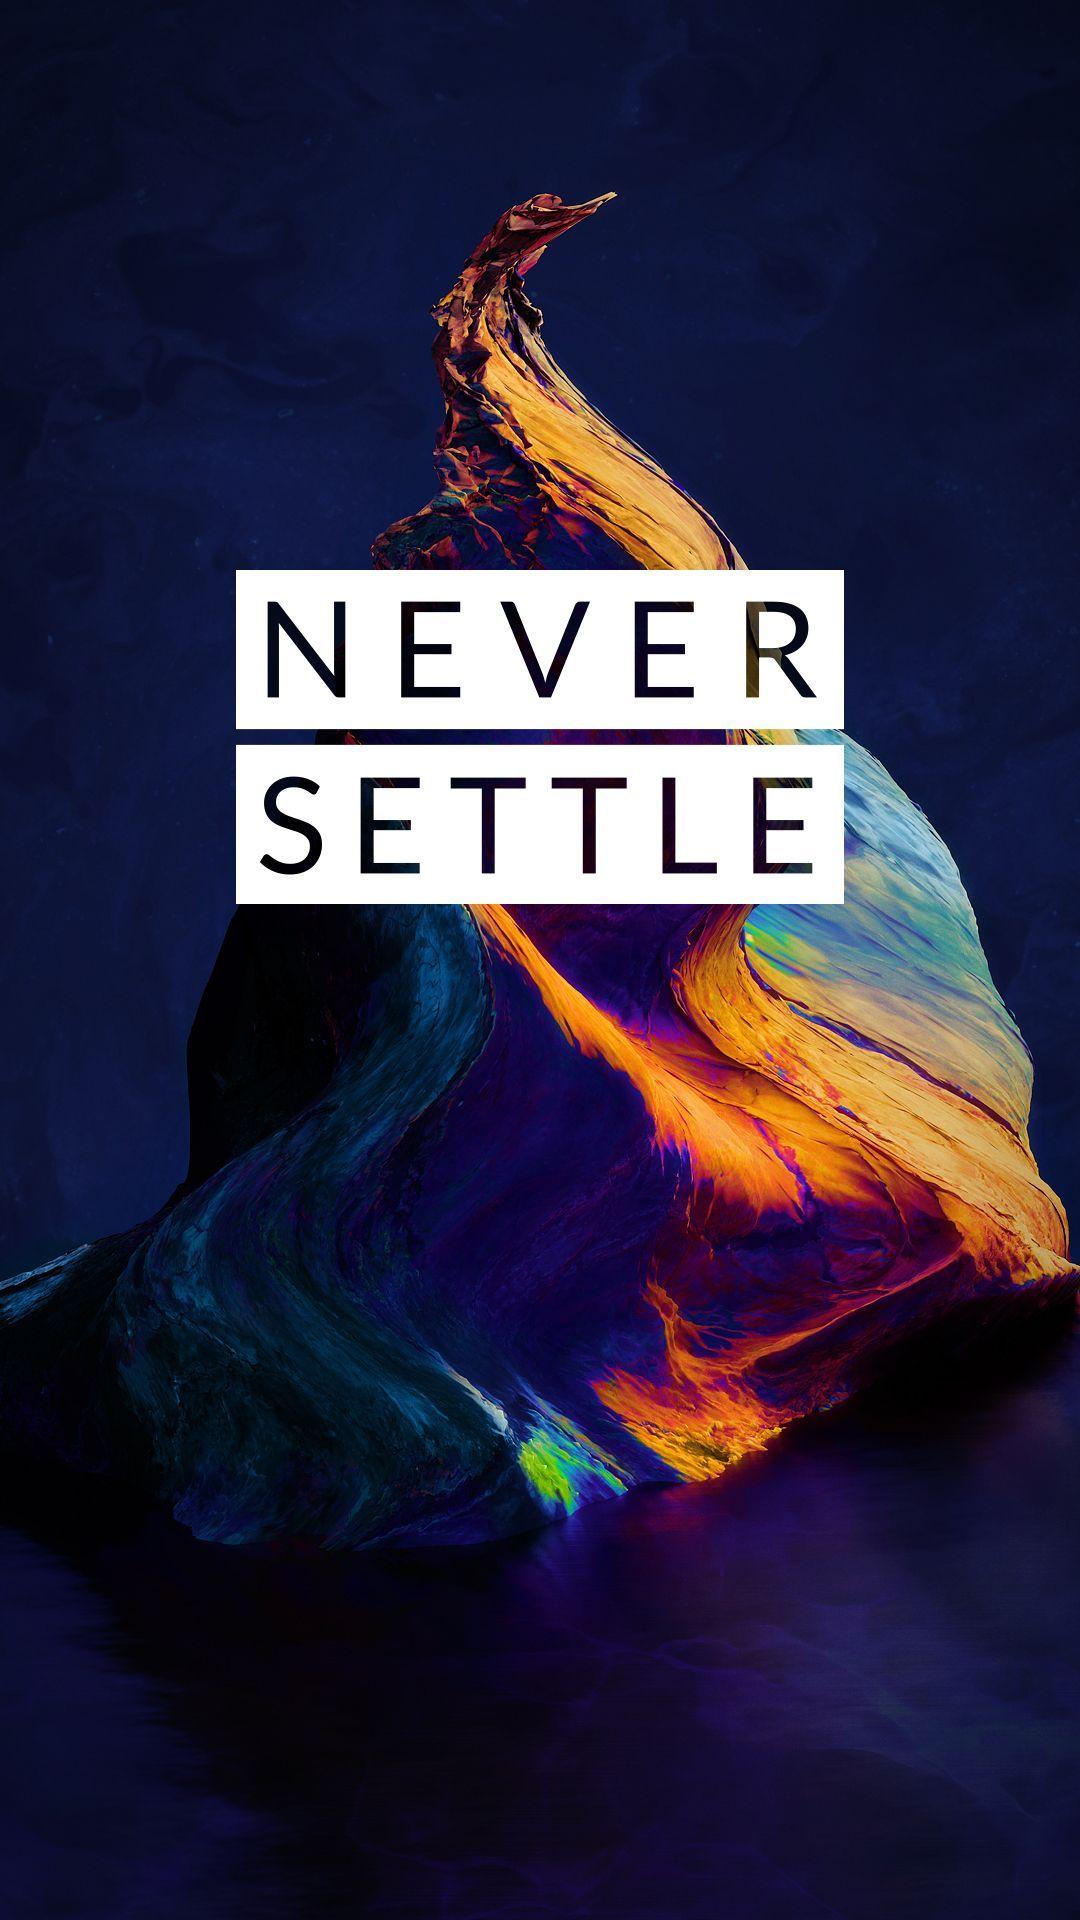 Forza Horizon, oneplus, oneplus never settle, never settle, game, ps4,  carros, HD phone wallpaper